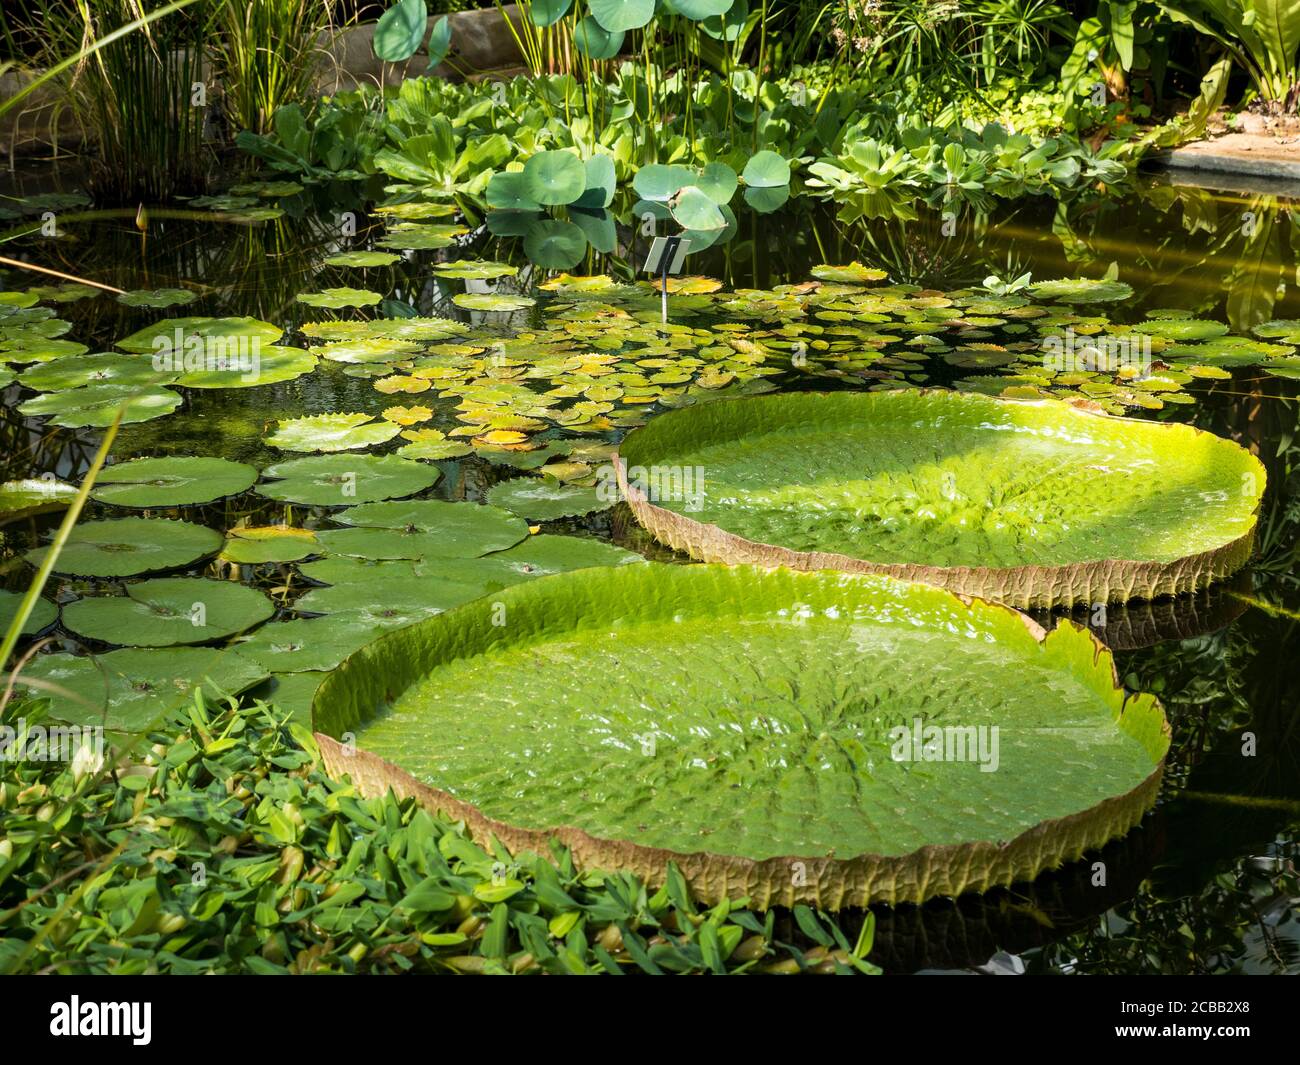 Giant Water Lillys, dans Tropical Greenhouse, Oxford Botanical Gardens, Oxford, Oxfordshire, Angleterre, Royaume-Uni, GB. Banque D'Images